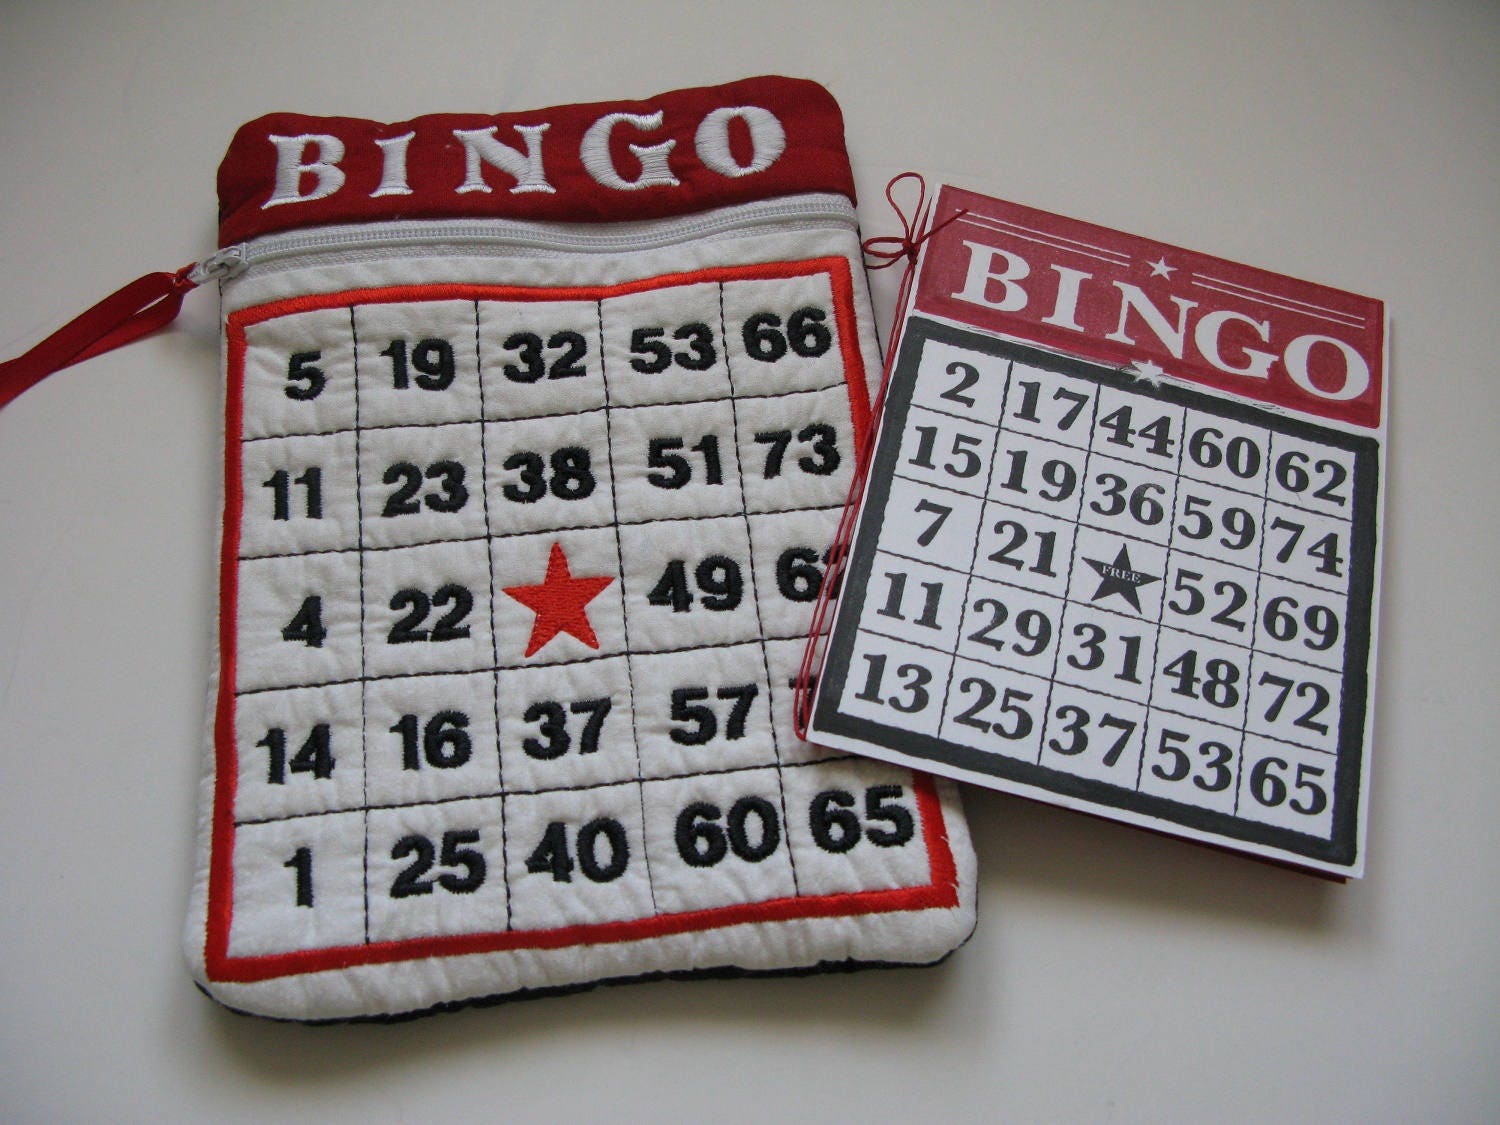 Embroidered Bingo Zipper Bag and Coordinating Gift Card